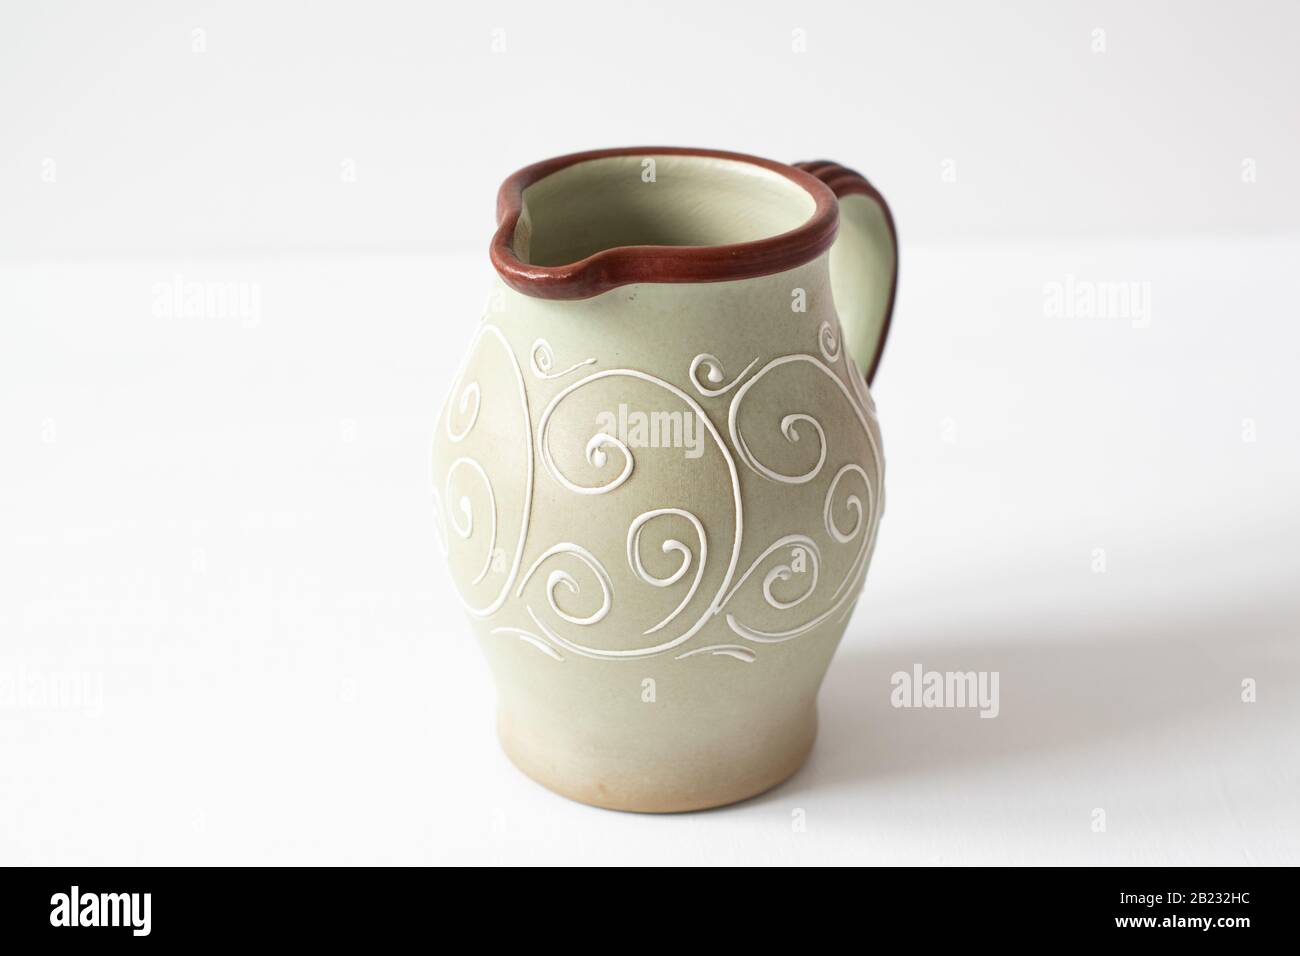 An example of a Denby Pottery Stoneware Ferndale Pitcher / jug on a plain background Stock Photo